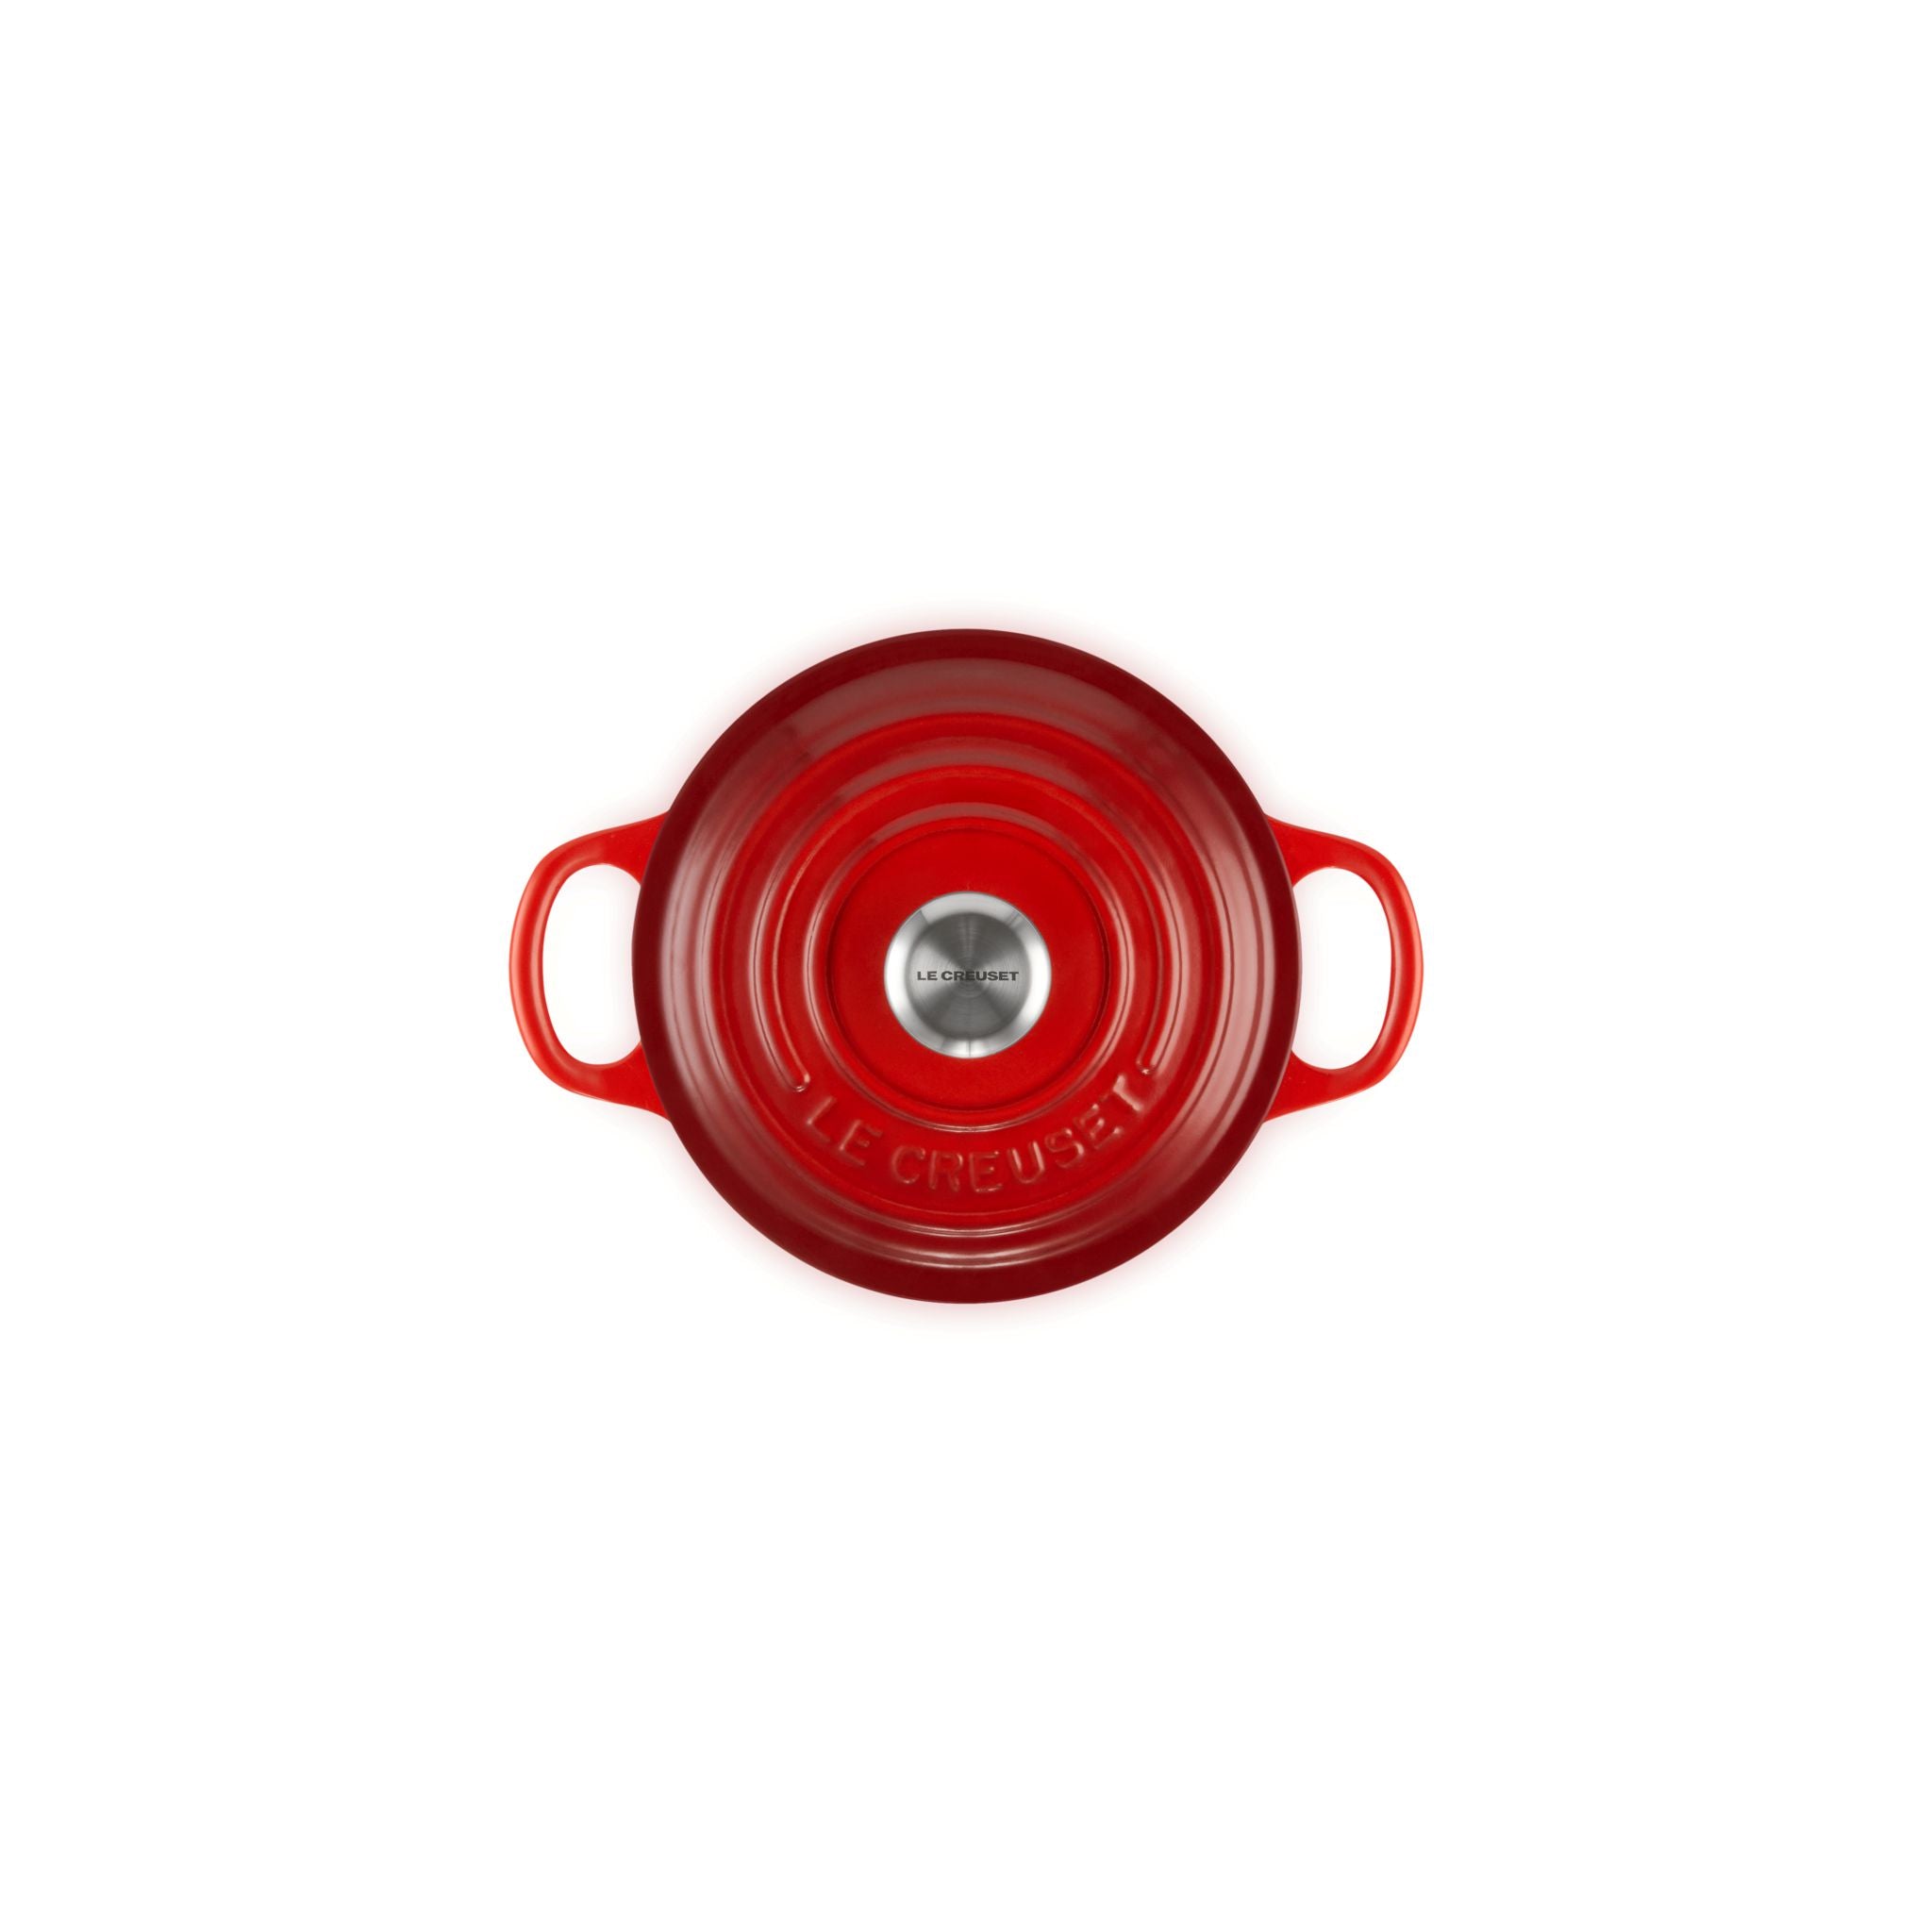 Le Creuset 0.9L Cherry Red French/ Dutch Oven (14 cm) - LS2501-1467